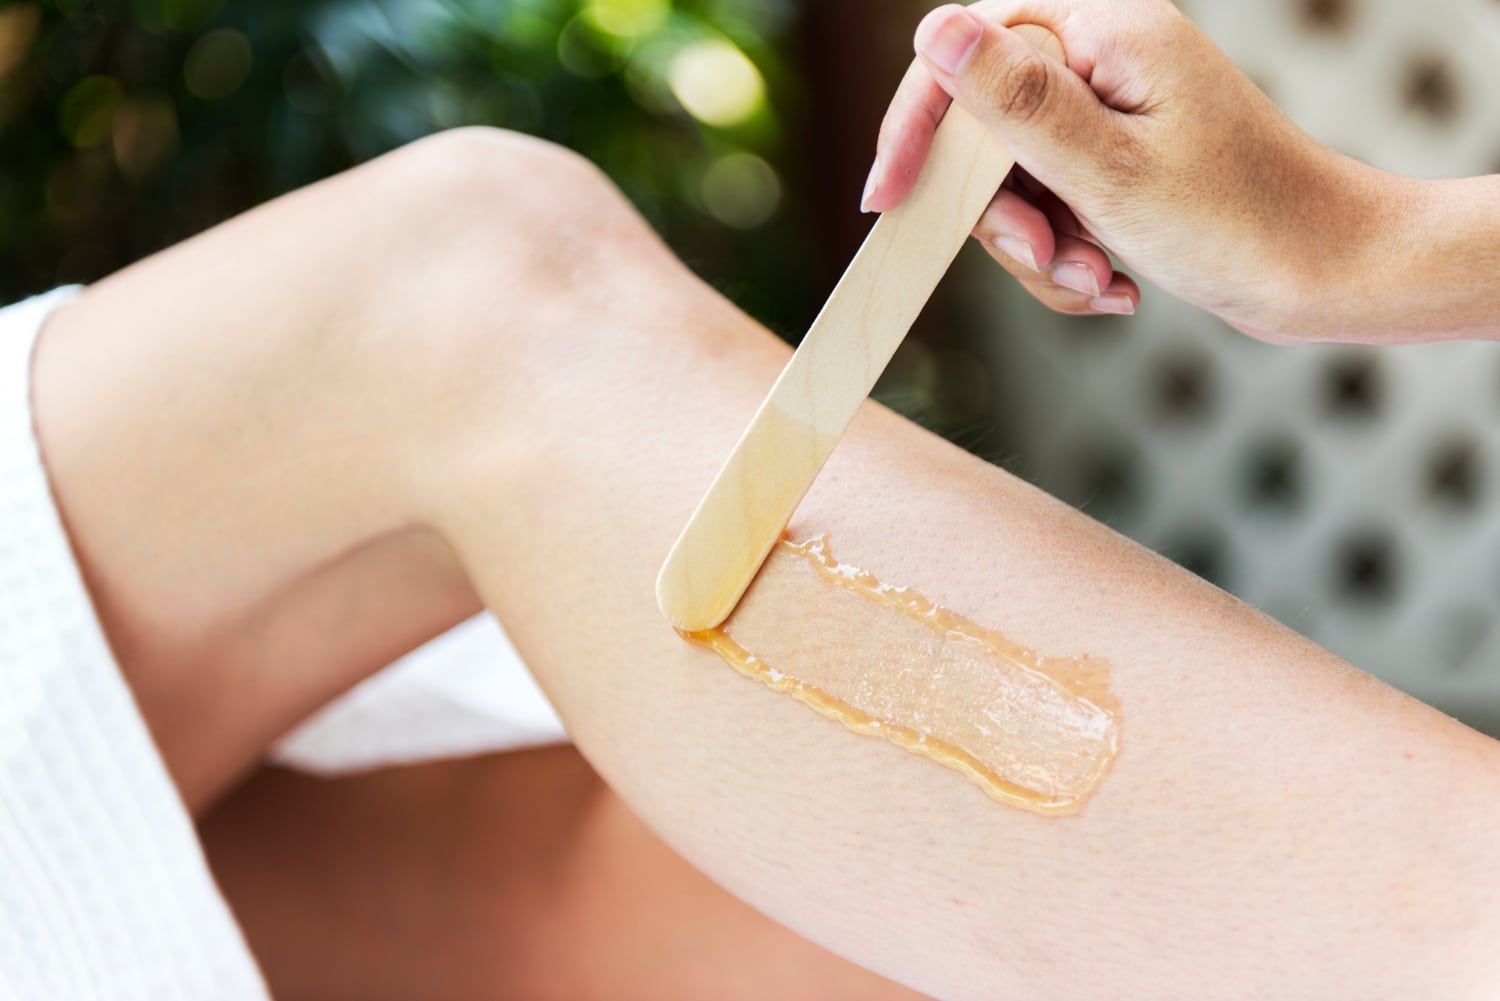 What to Expect Before Your Appointment For Brazilian Waxing?